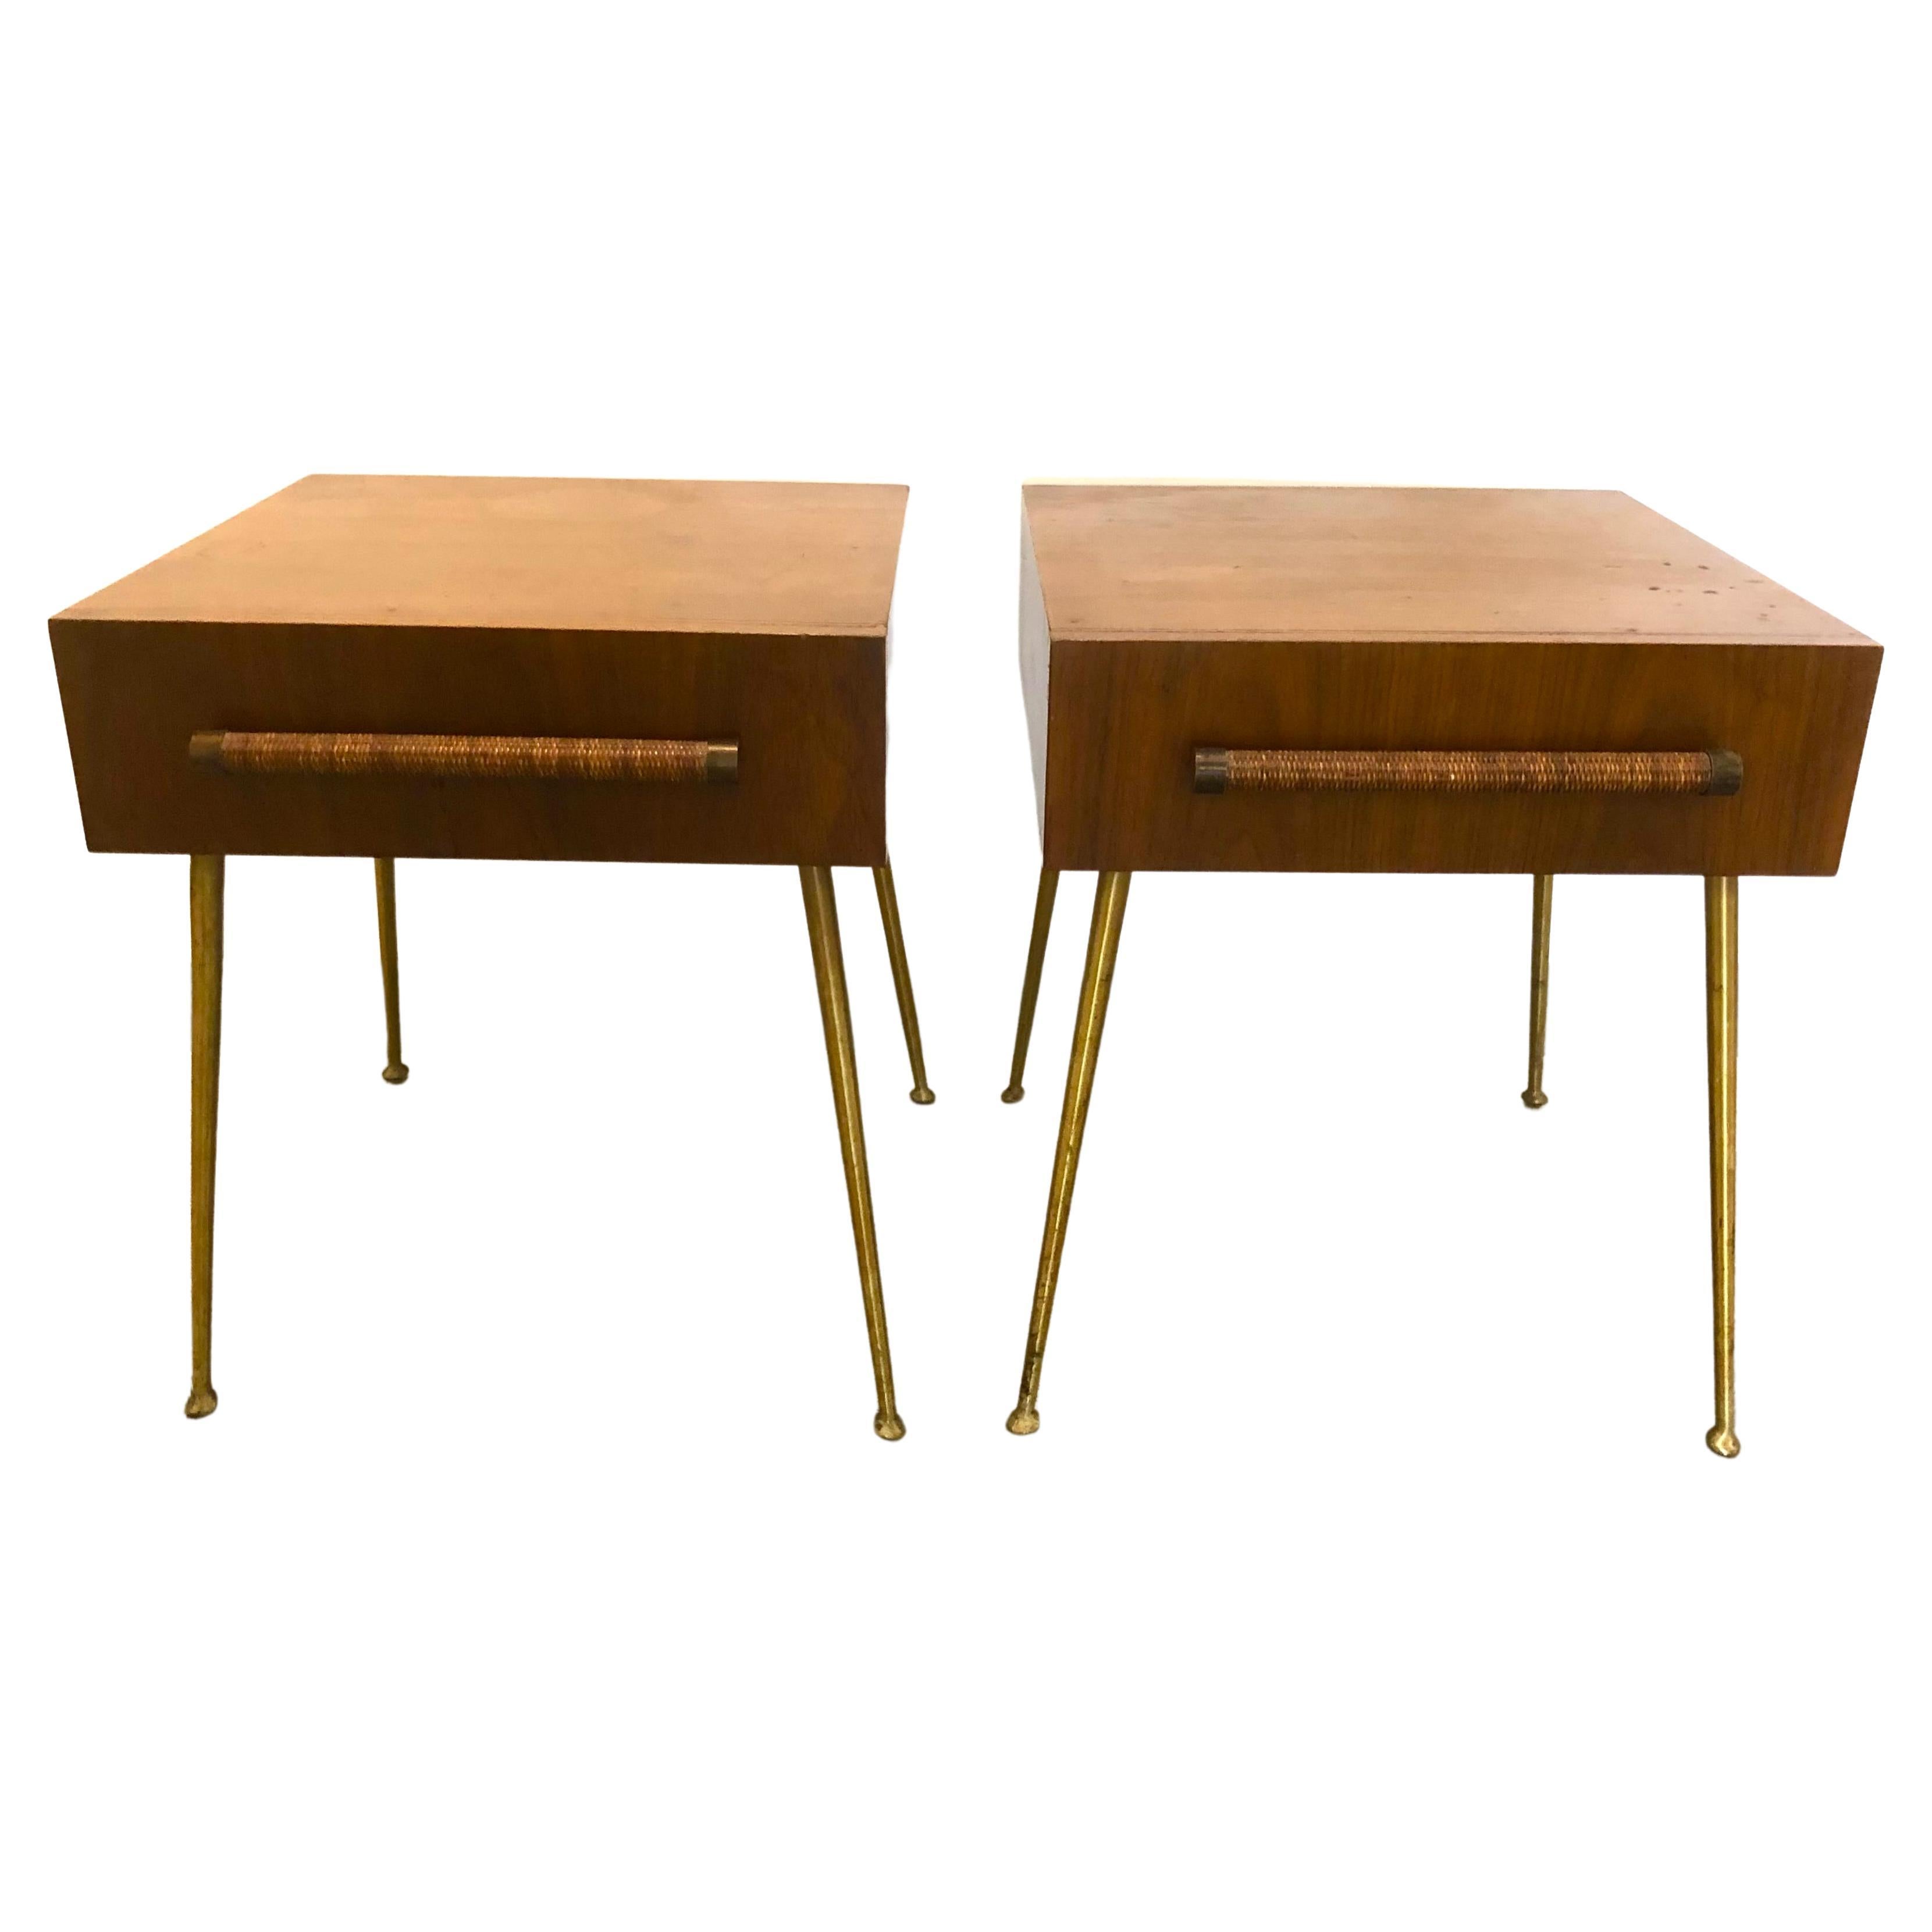 Iconic pair of T.H. Robsjohn Gibbings for Widdicomb end tables or nightstands. Single drawer with rattan-wrapped pulls, raised on long tapering brass legs. Widdicomb labels to inner drawer.